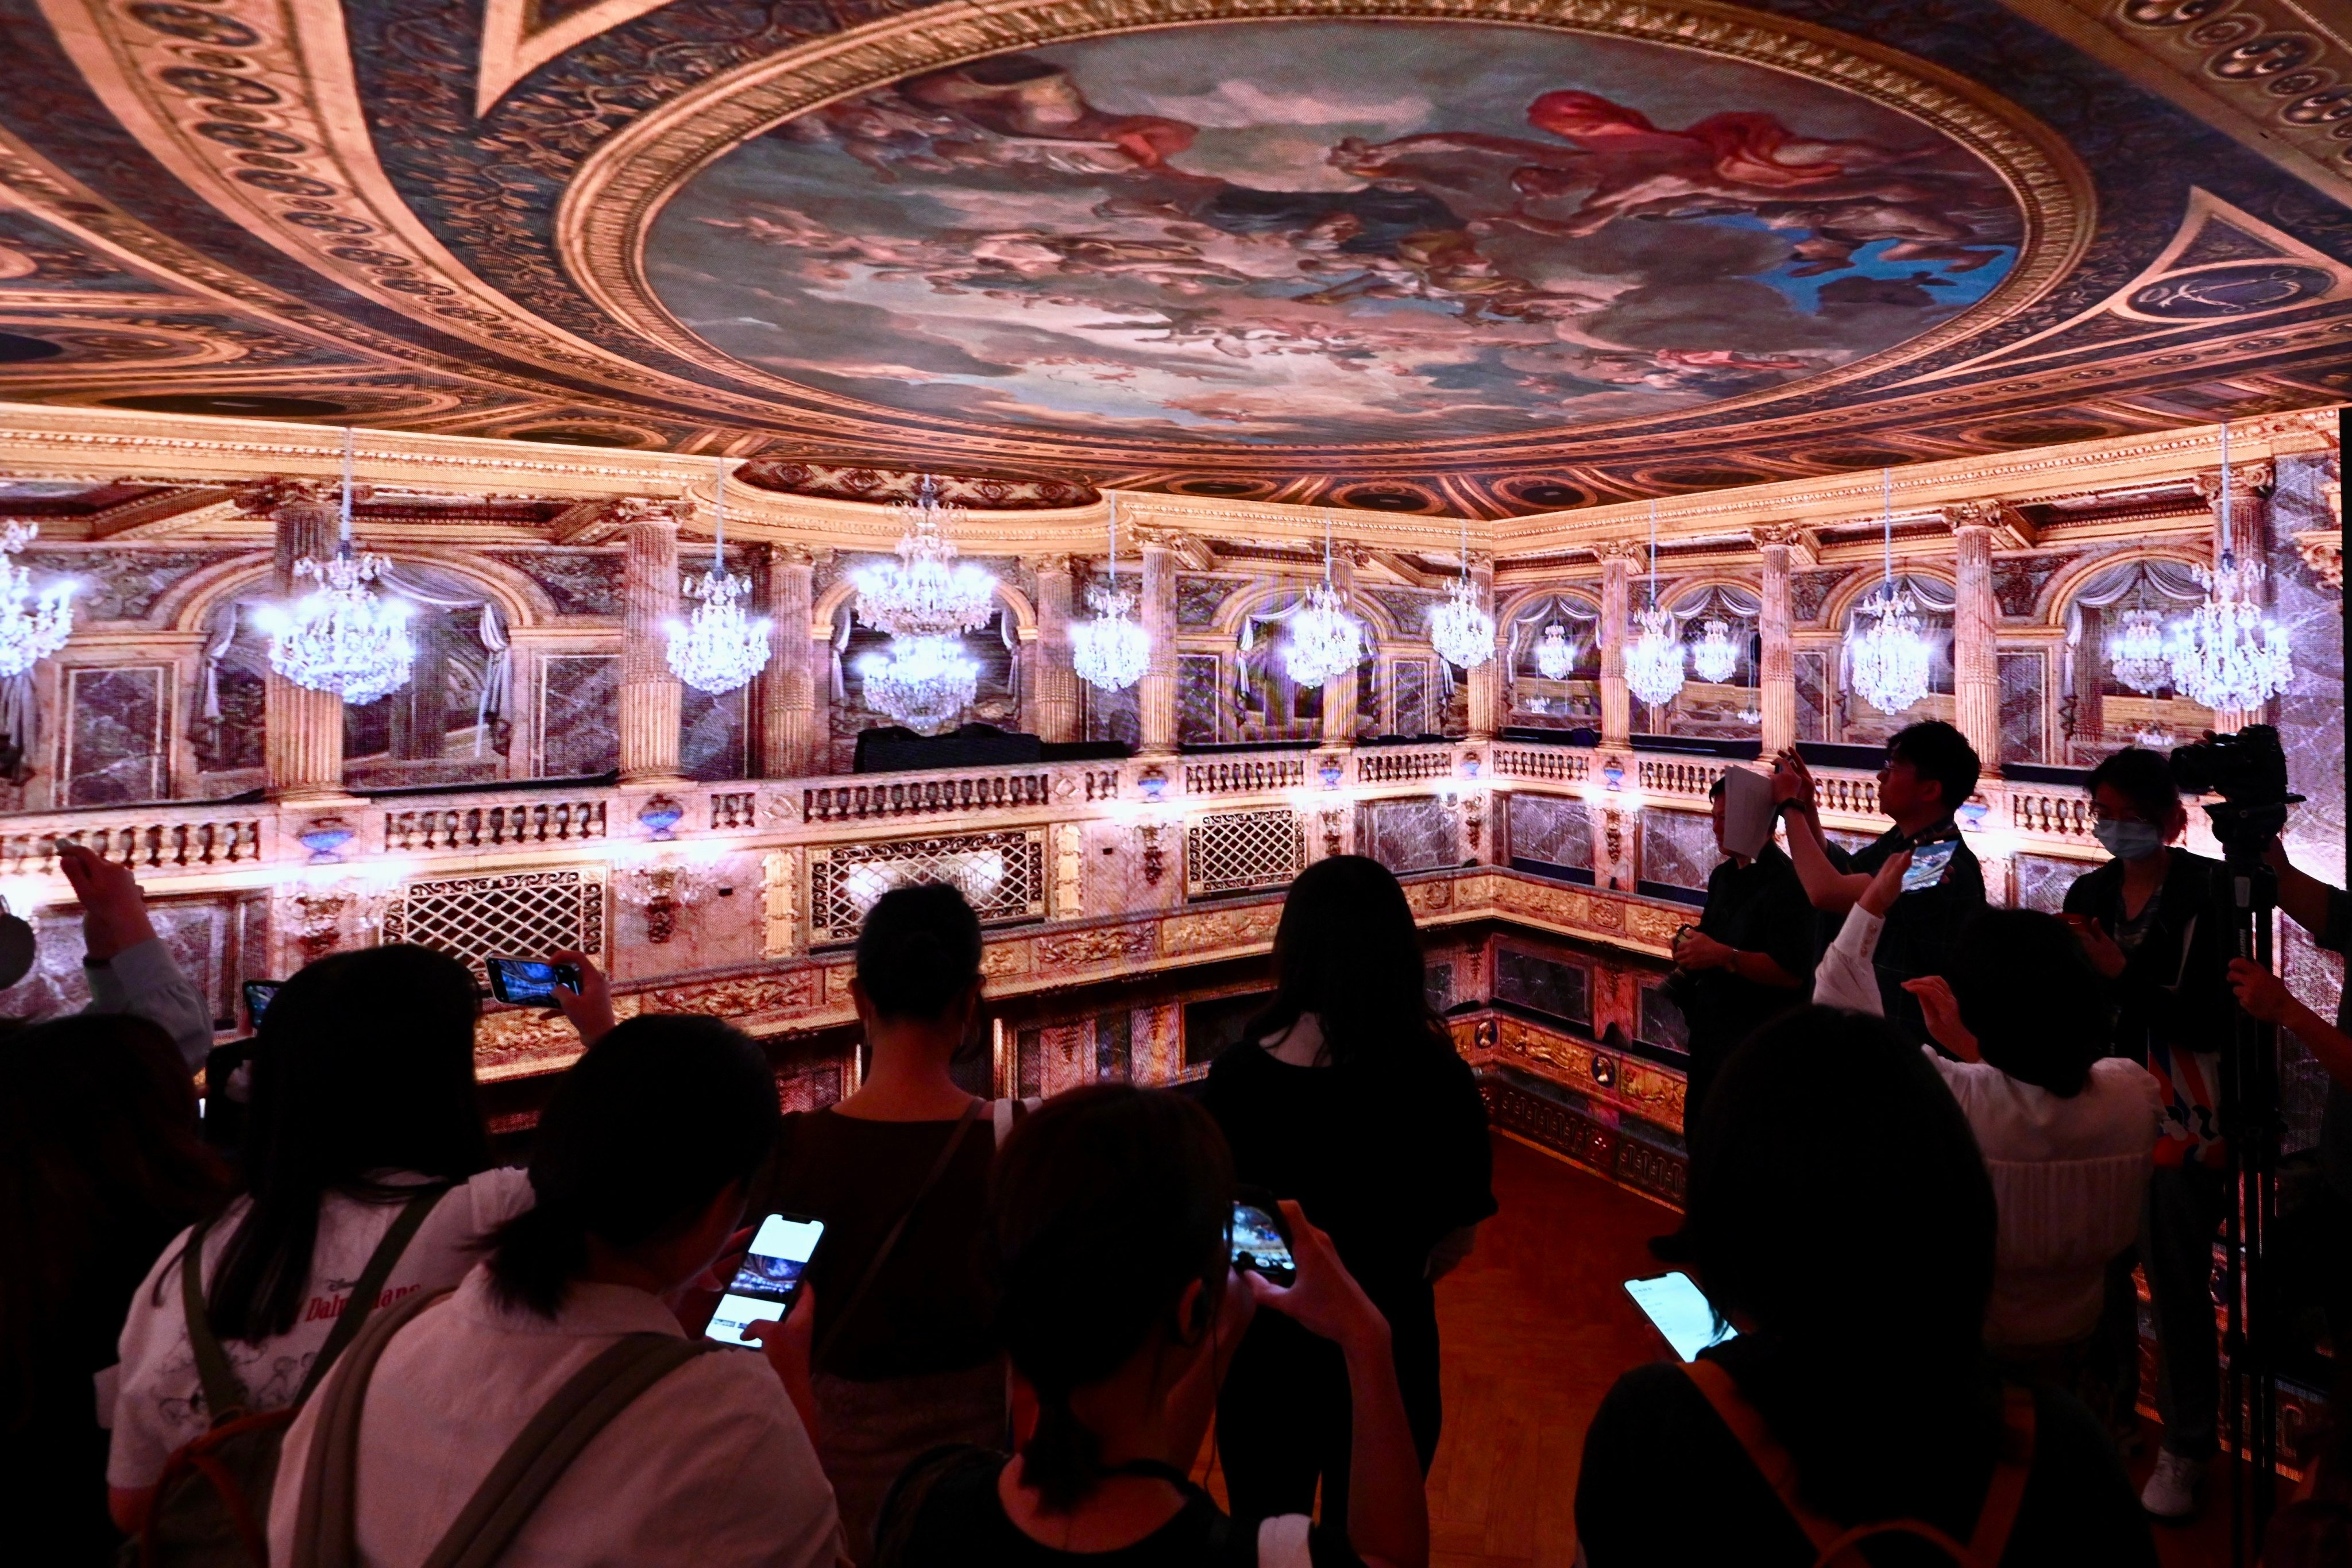 An LED projection of the Hall of Mirrors at France’s Palace of Versailles is displayed at the “Virtually Versailles” experience at the Hong Kong Heritage Museum. Photo: Hong Kong Heritage Museum